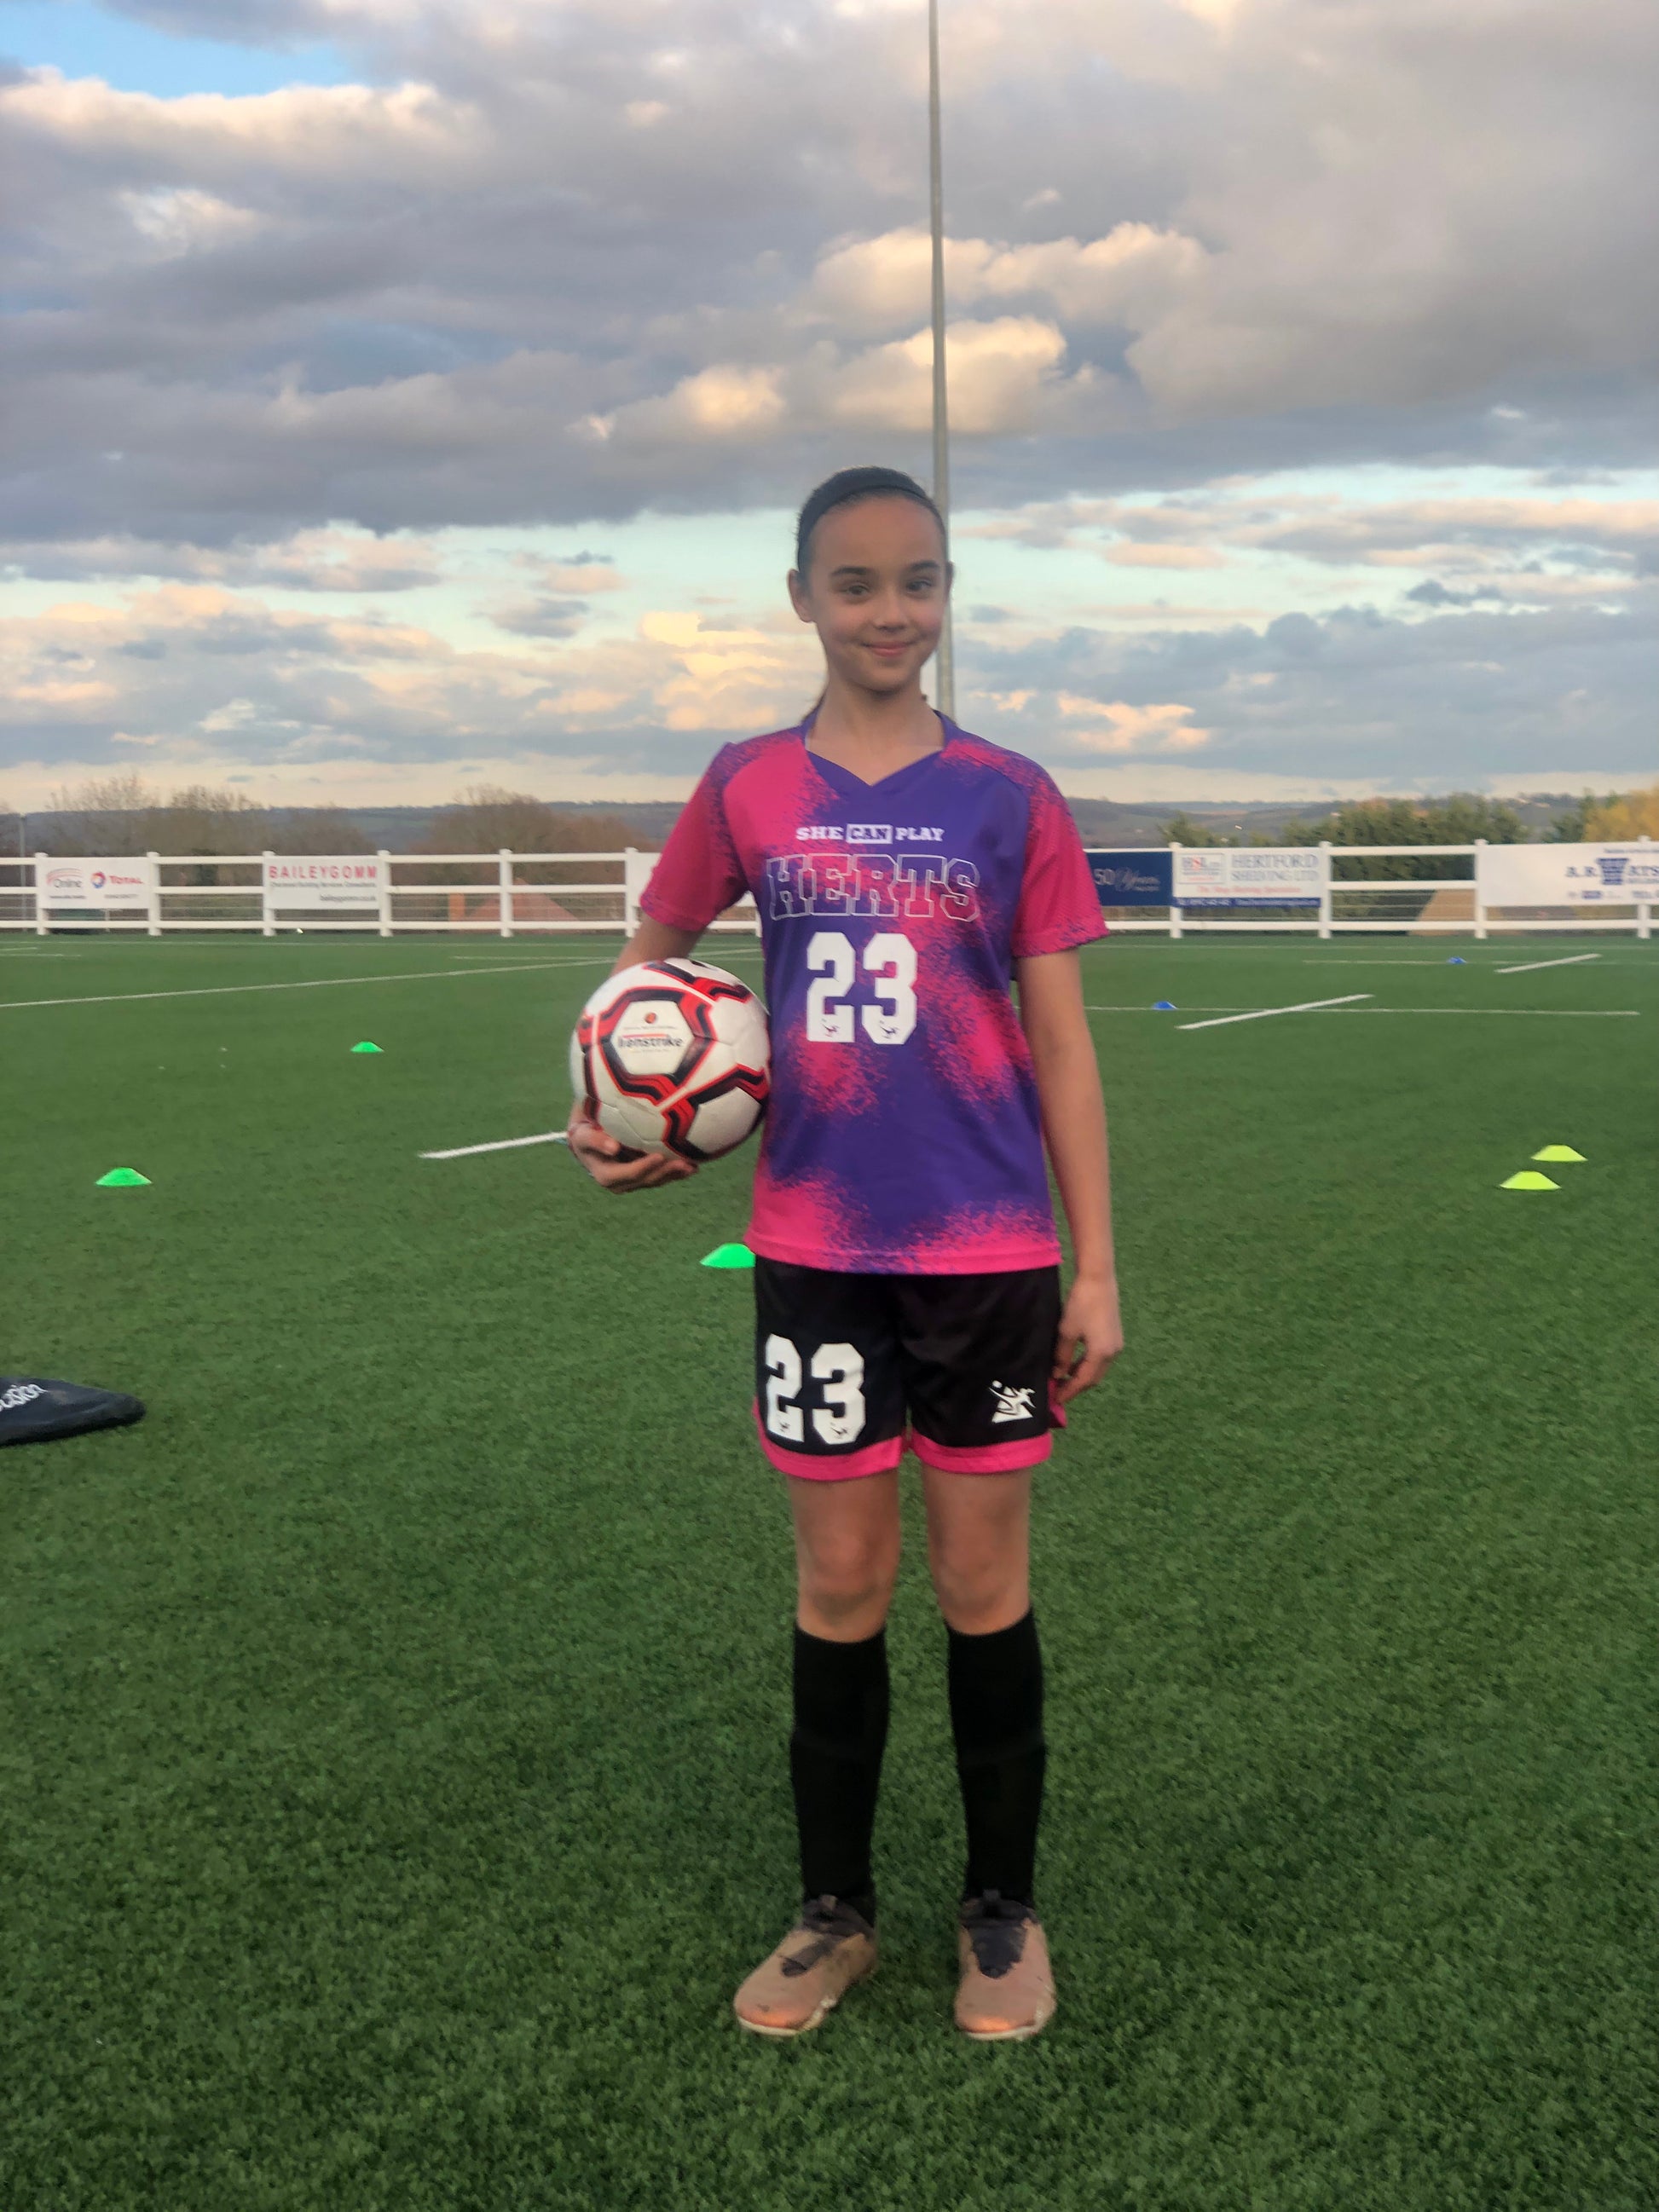 TRAINING KIT 2022/2023 - SHE CAN PLAY